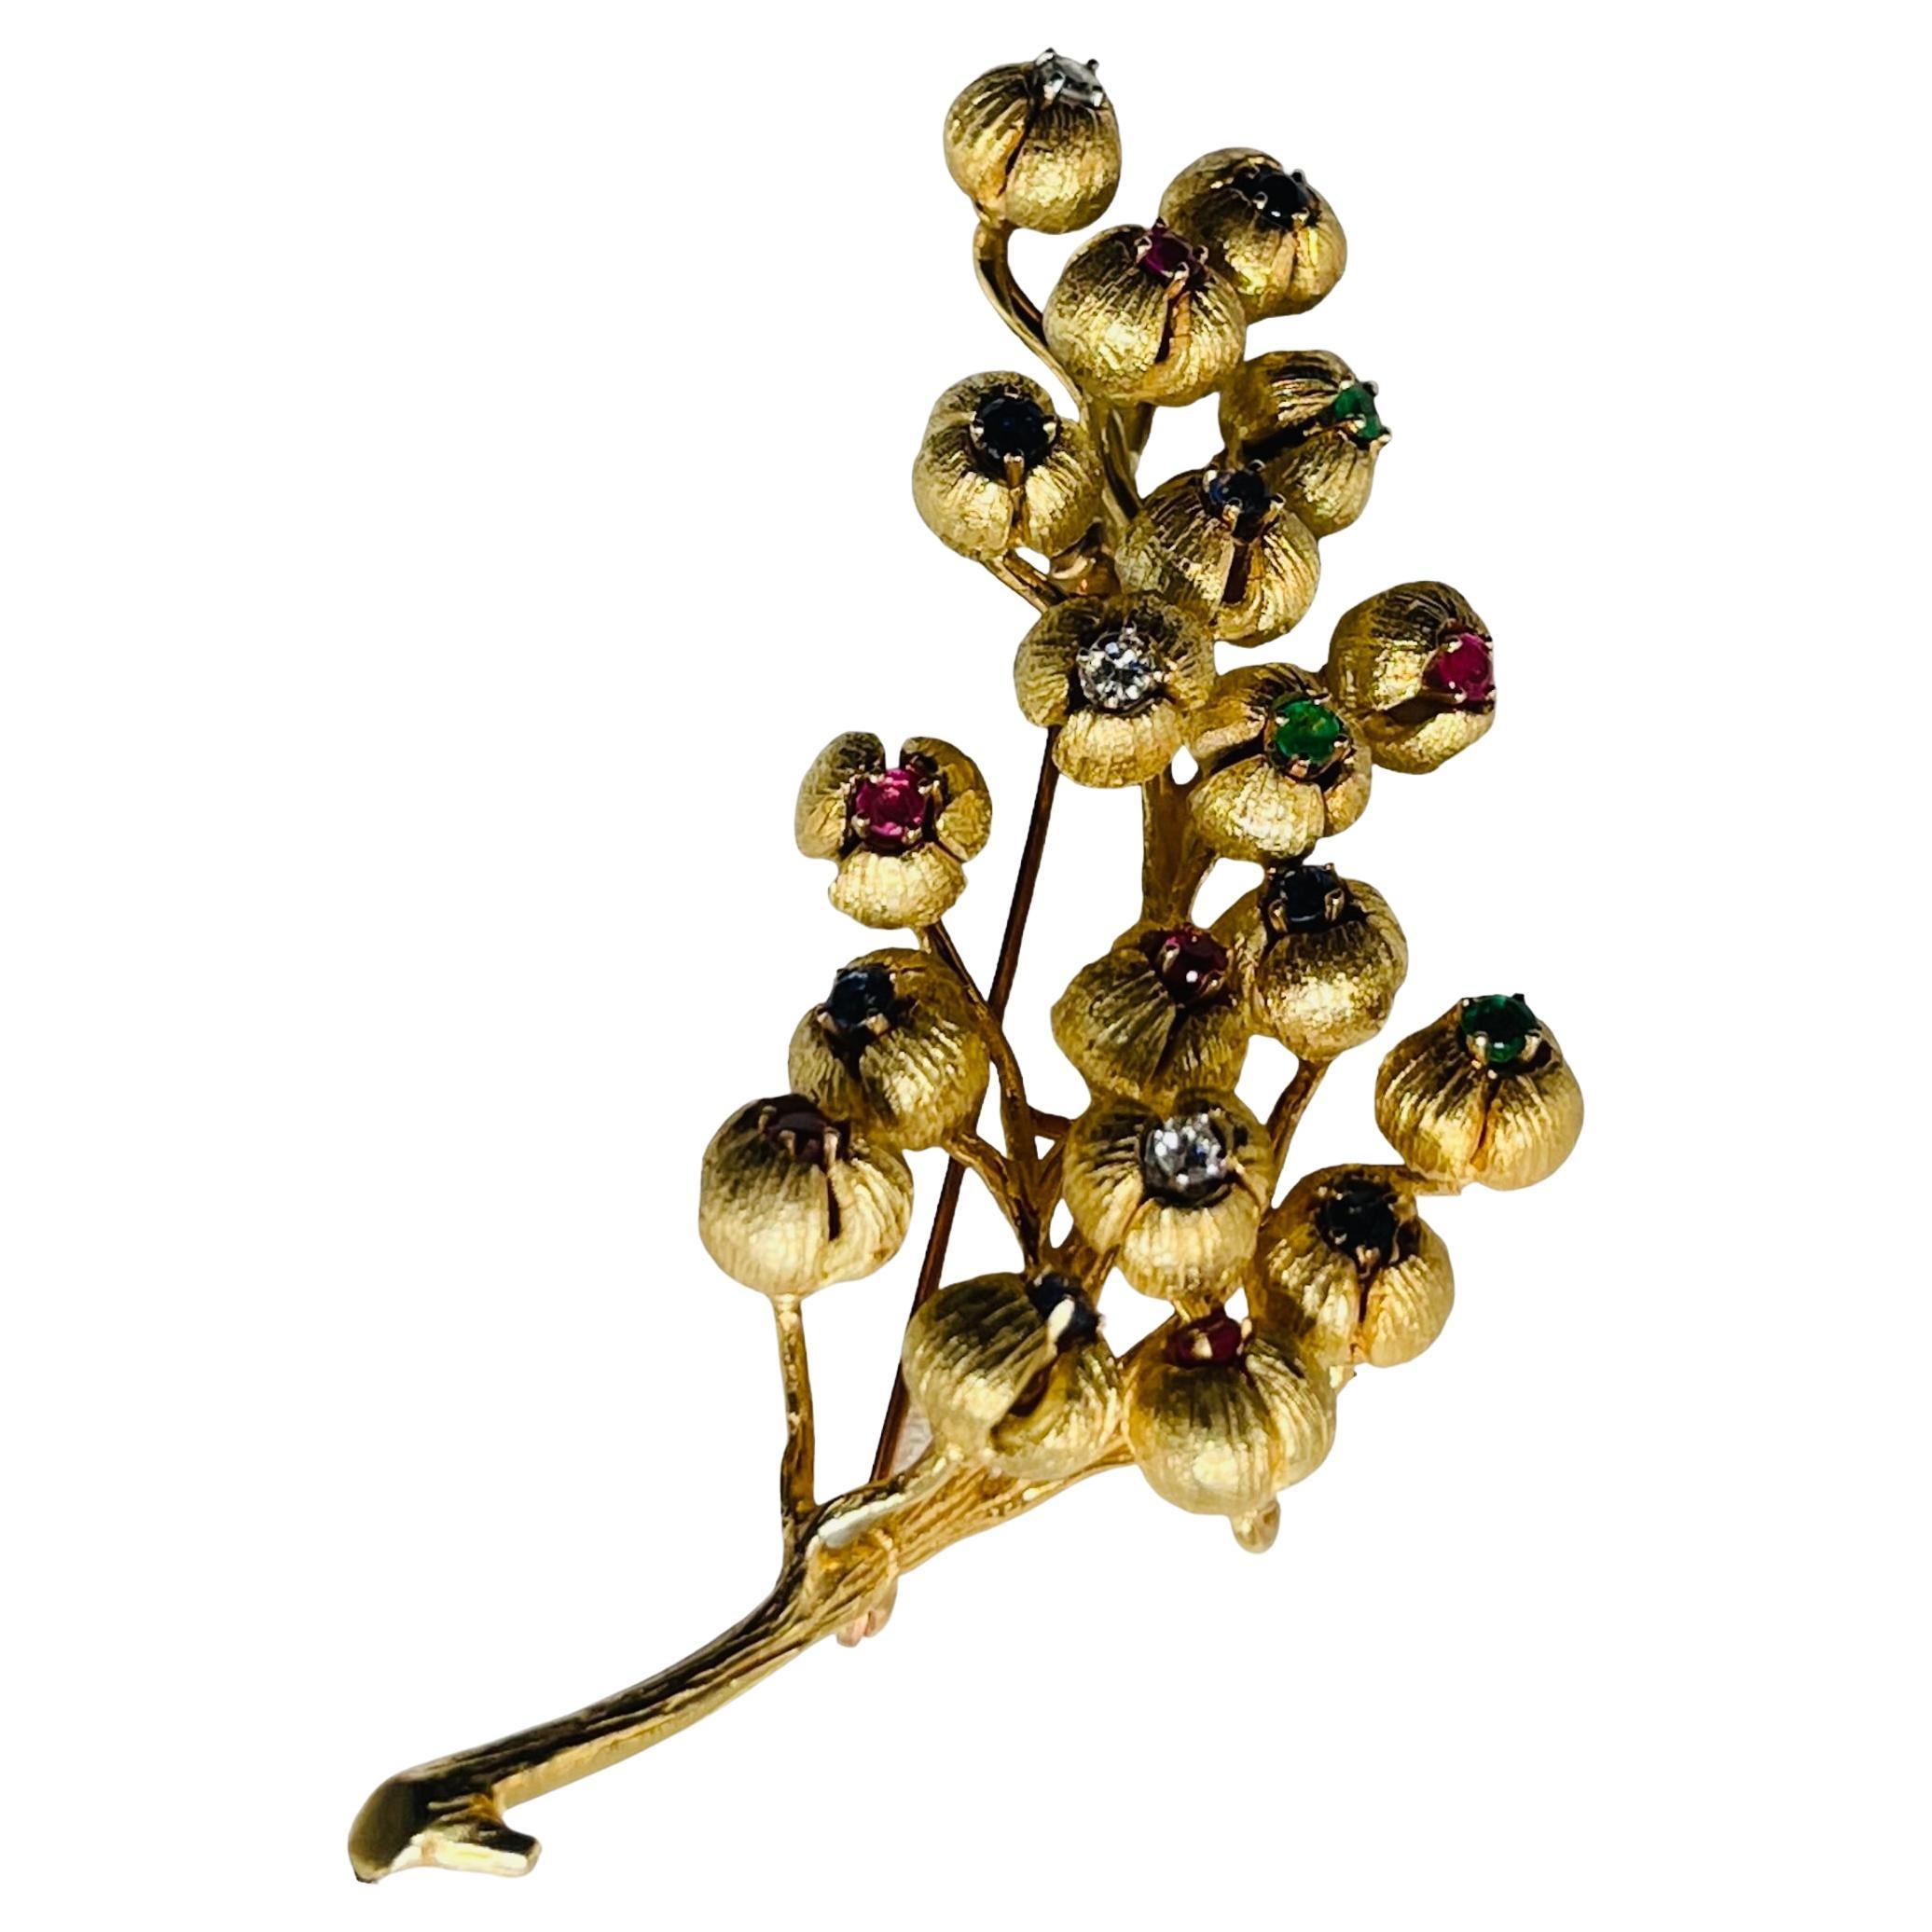 This is a 18K yellow gold multi gemstones diamonds brooch. It depicts a long branch of Lilies of The Valley flower buds with multiples small branches of buds of the same flower embellished with round cut six rubies, seven sapphires, three emeralds